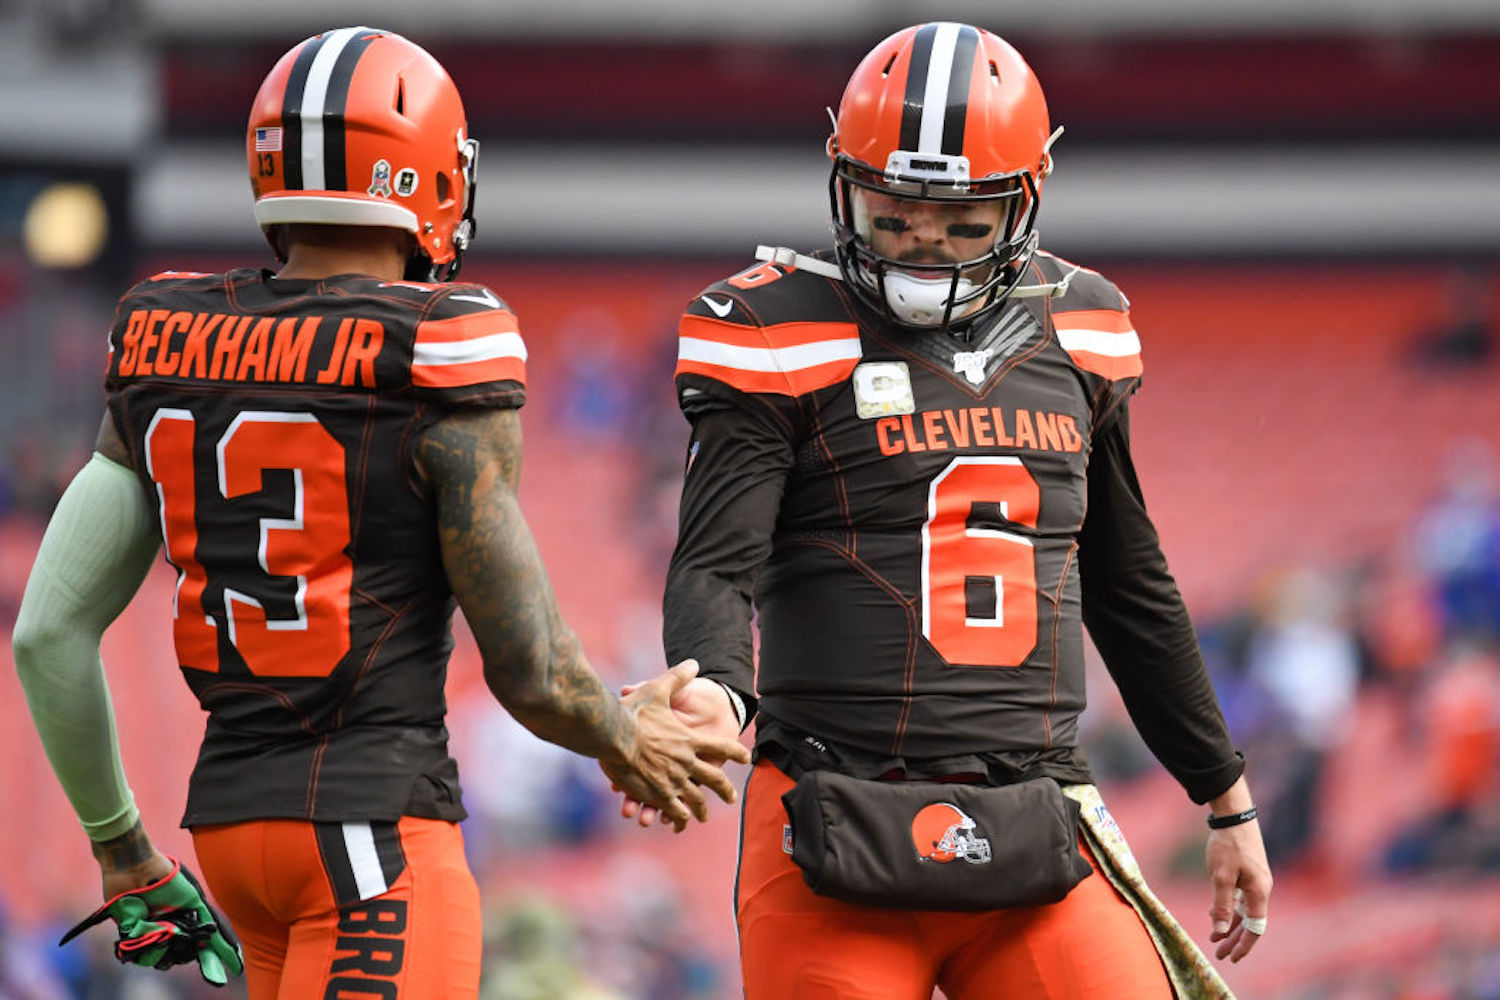 The Baker Mayfield-Odell Beckham Jr. connection sputtered all last season, but Beckham is convinced the tides will turn in 2020.